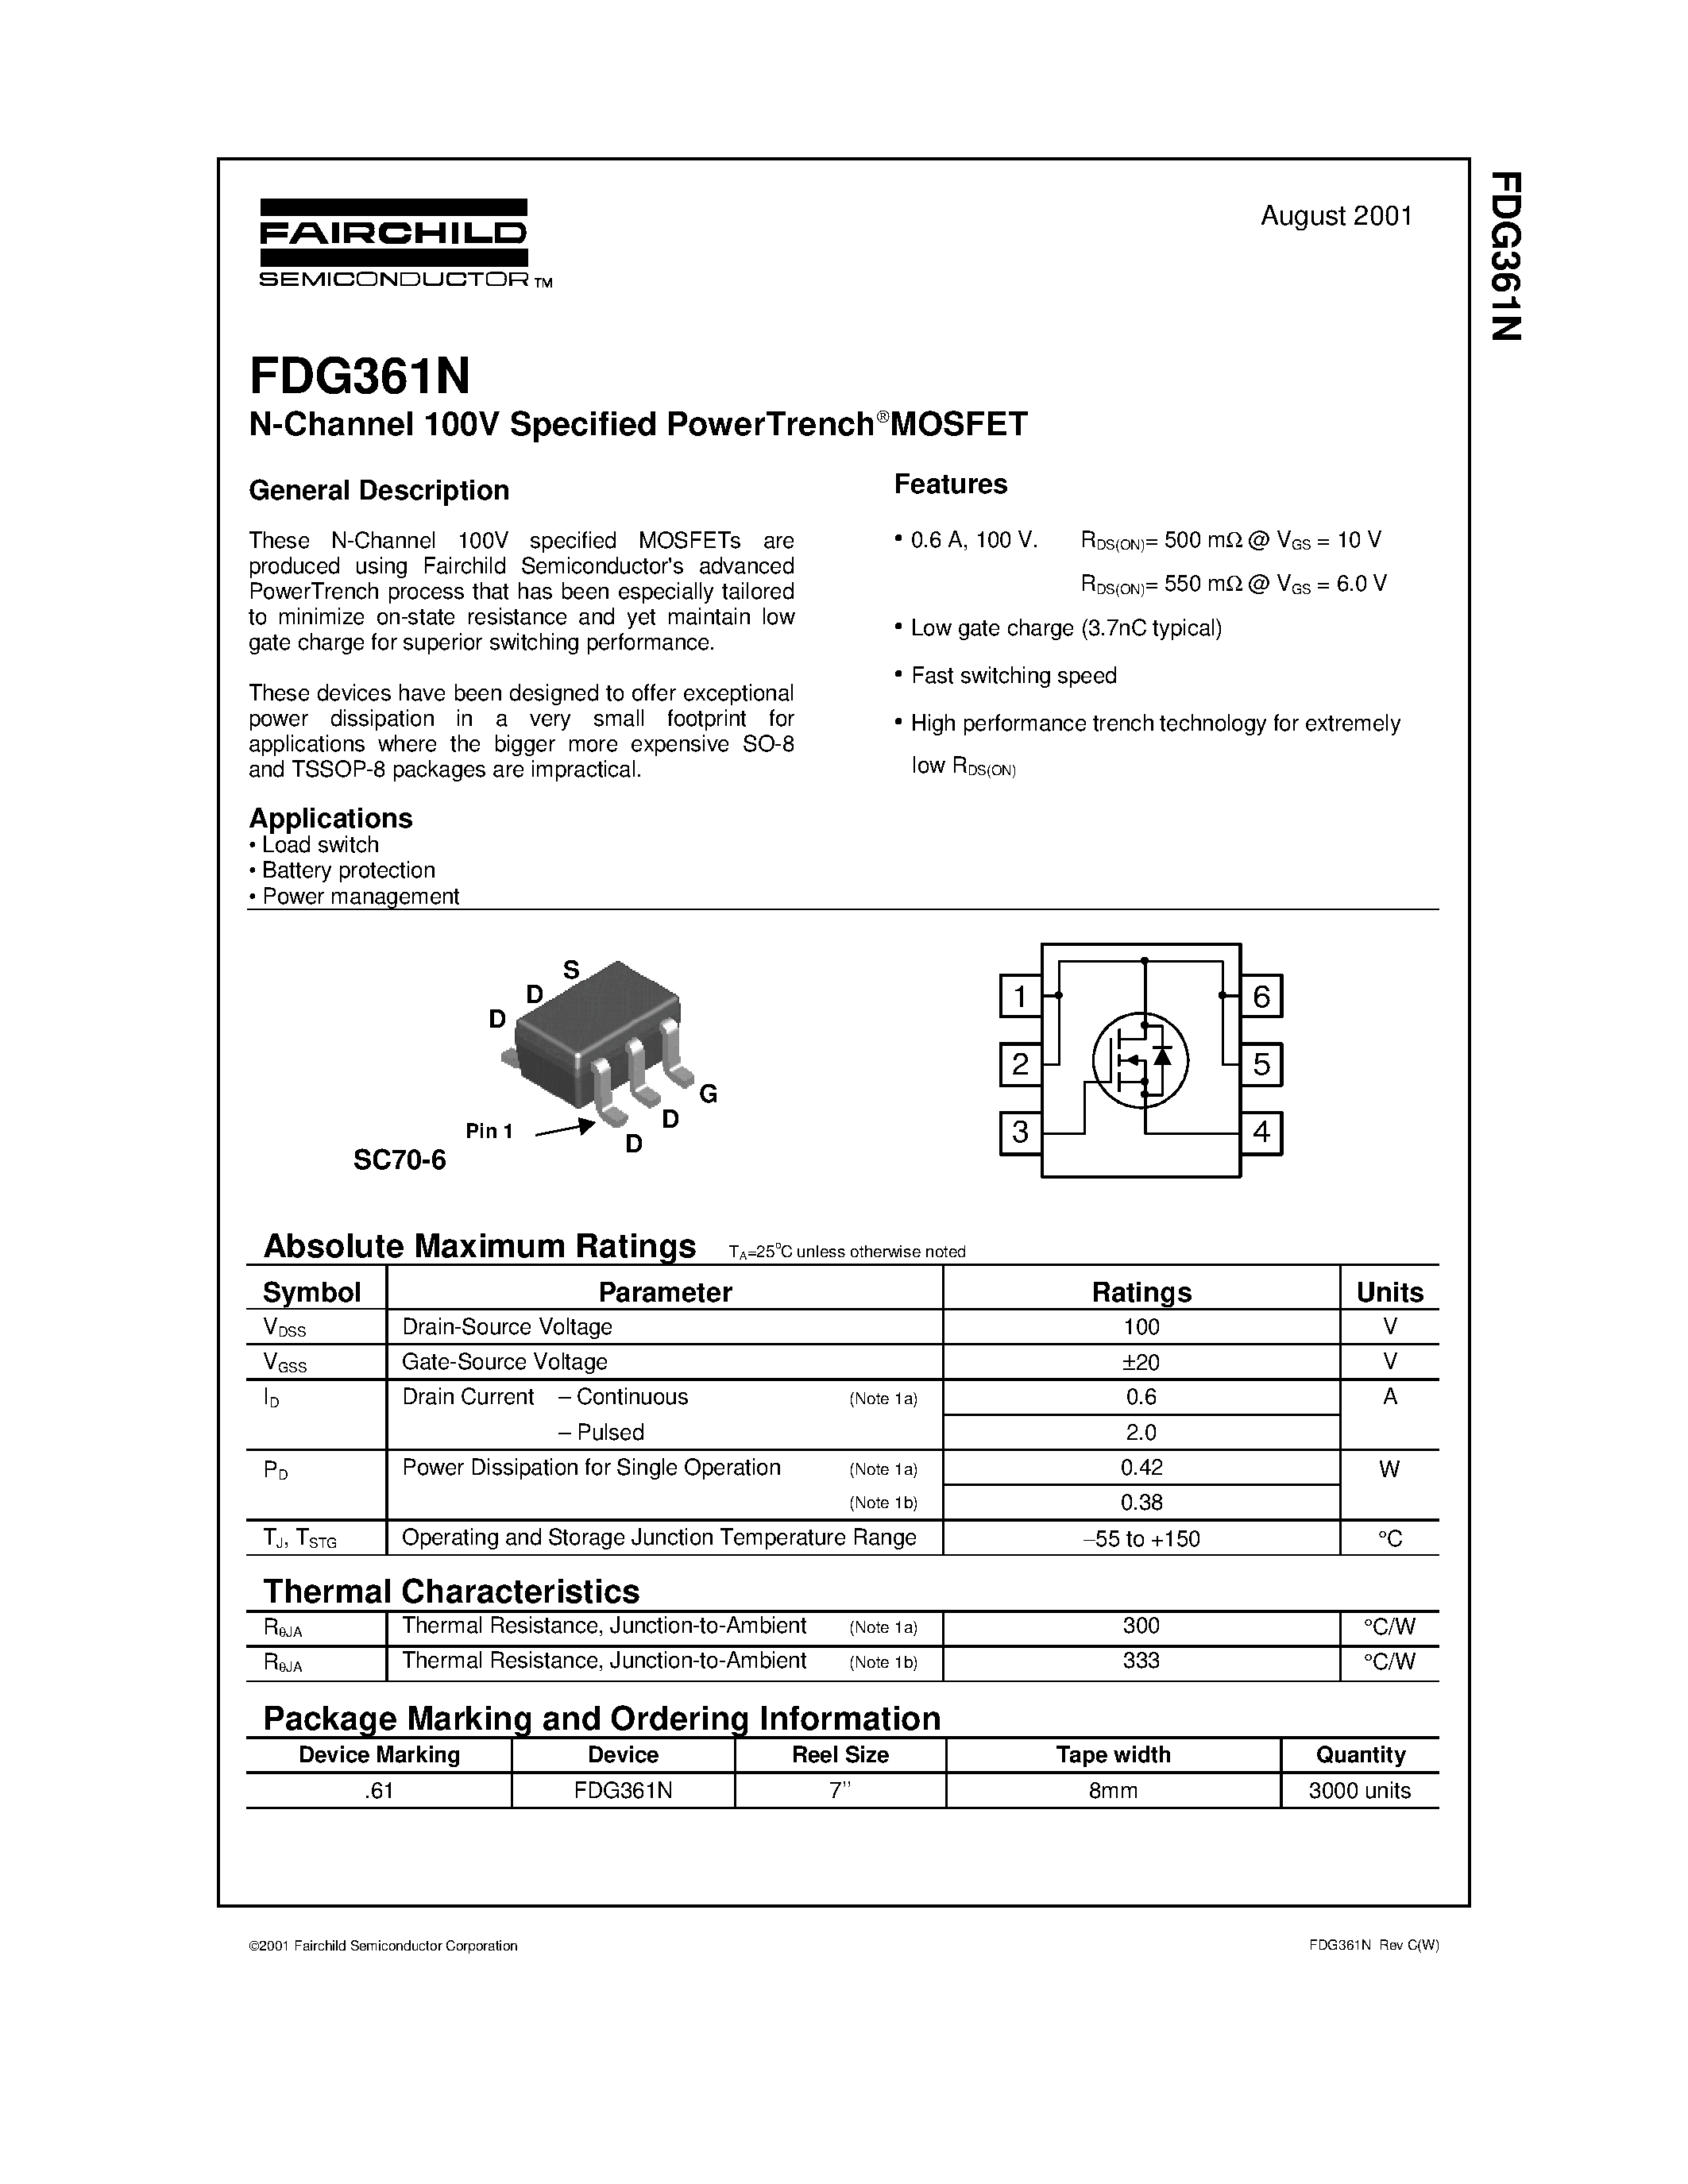 Даташит FDG361N-N-Channel 100V Specified PowerTrenchMOSFET страница 1